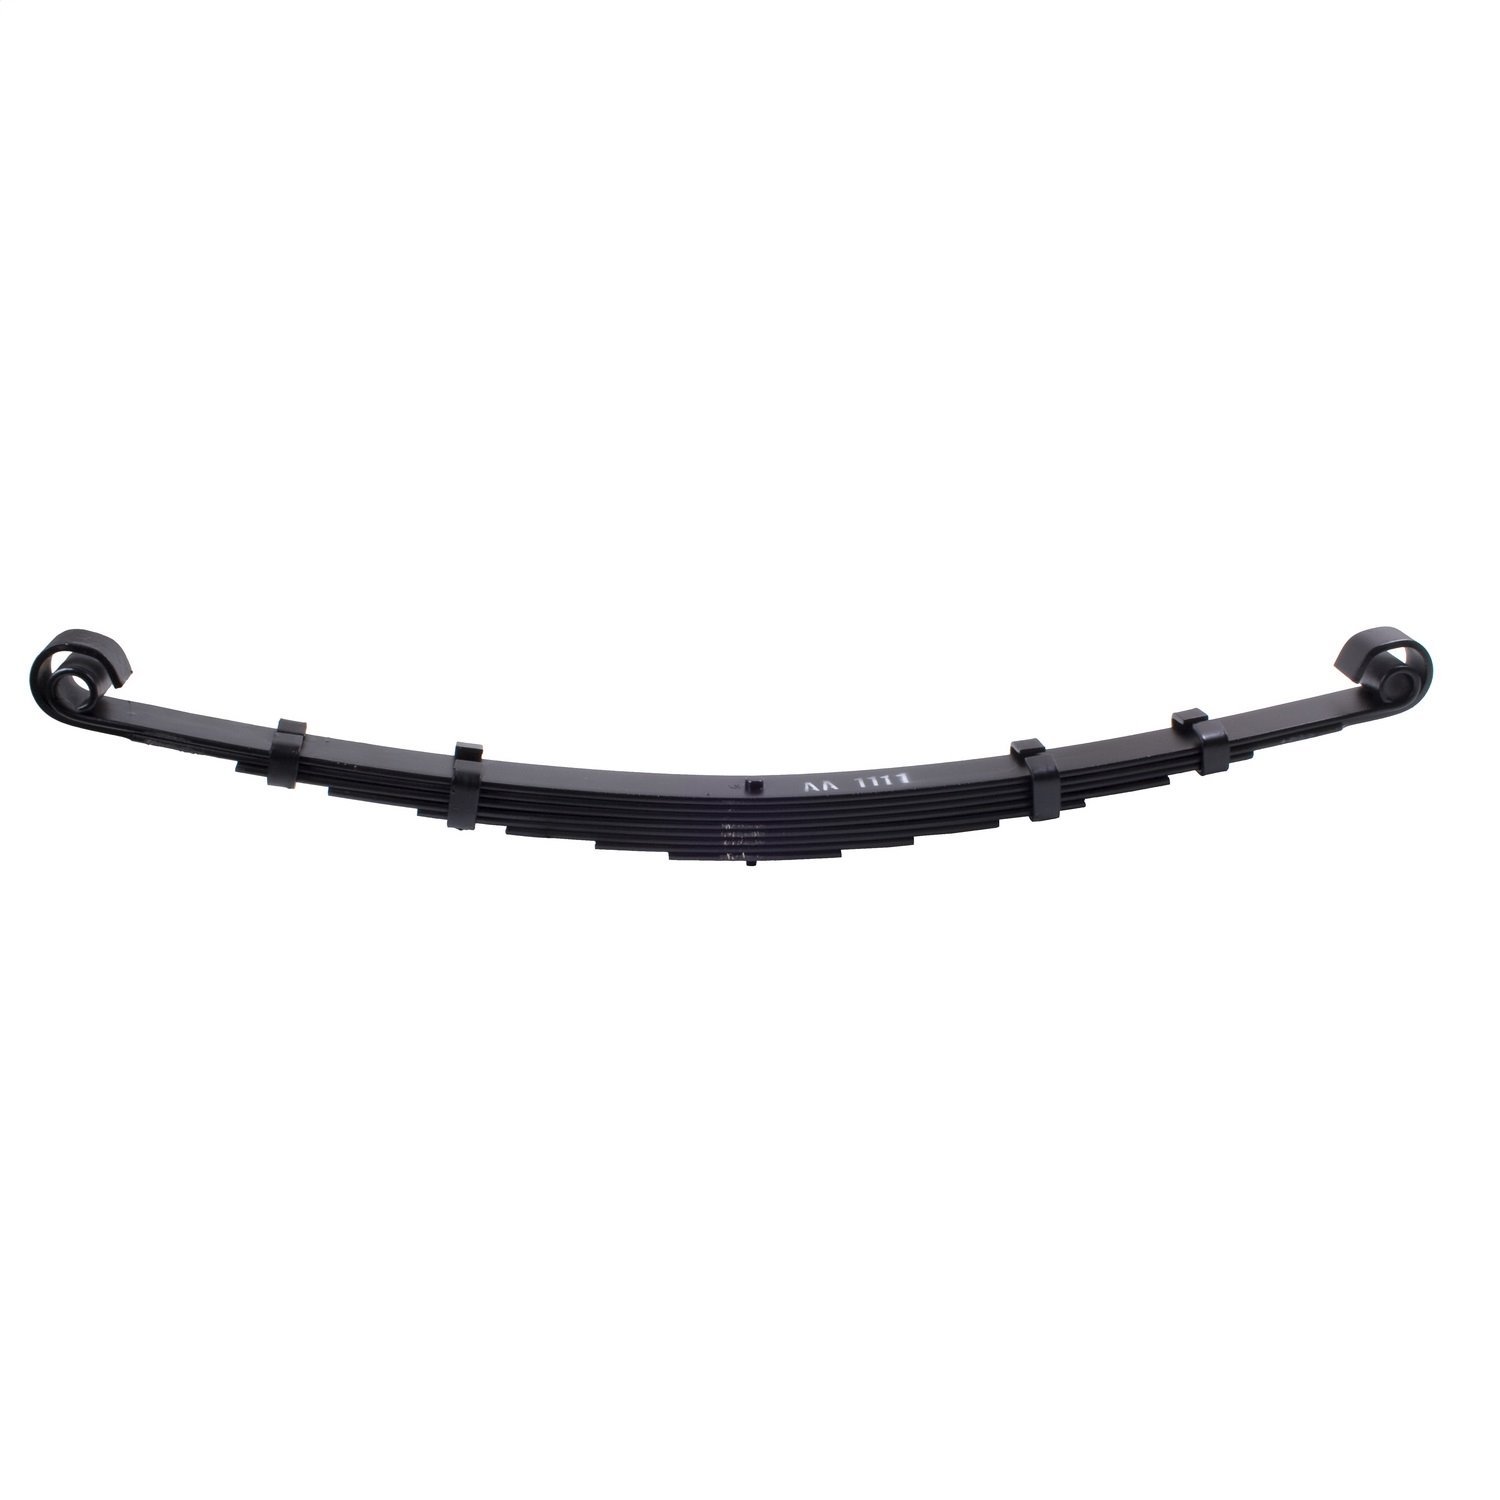 Stock replacement 8 leaf front spring from Omix-ADA, Fits 41-45 Willys MBs 46-49 CJ2A and 49-53 CJ3A. Left or right side.